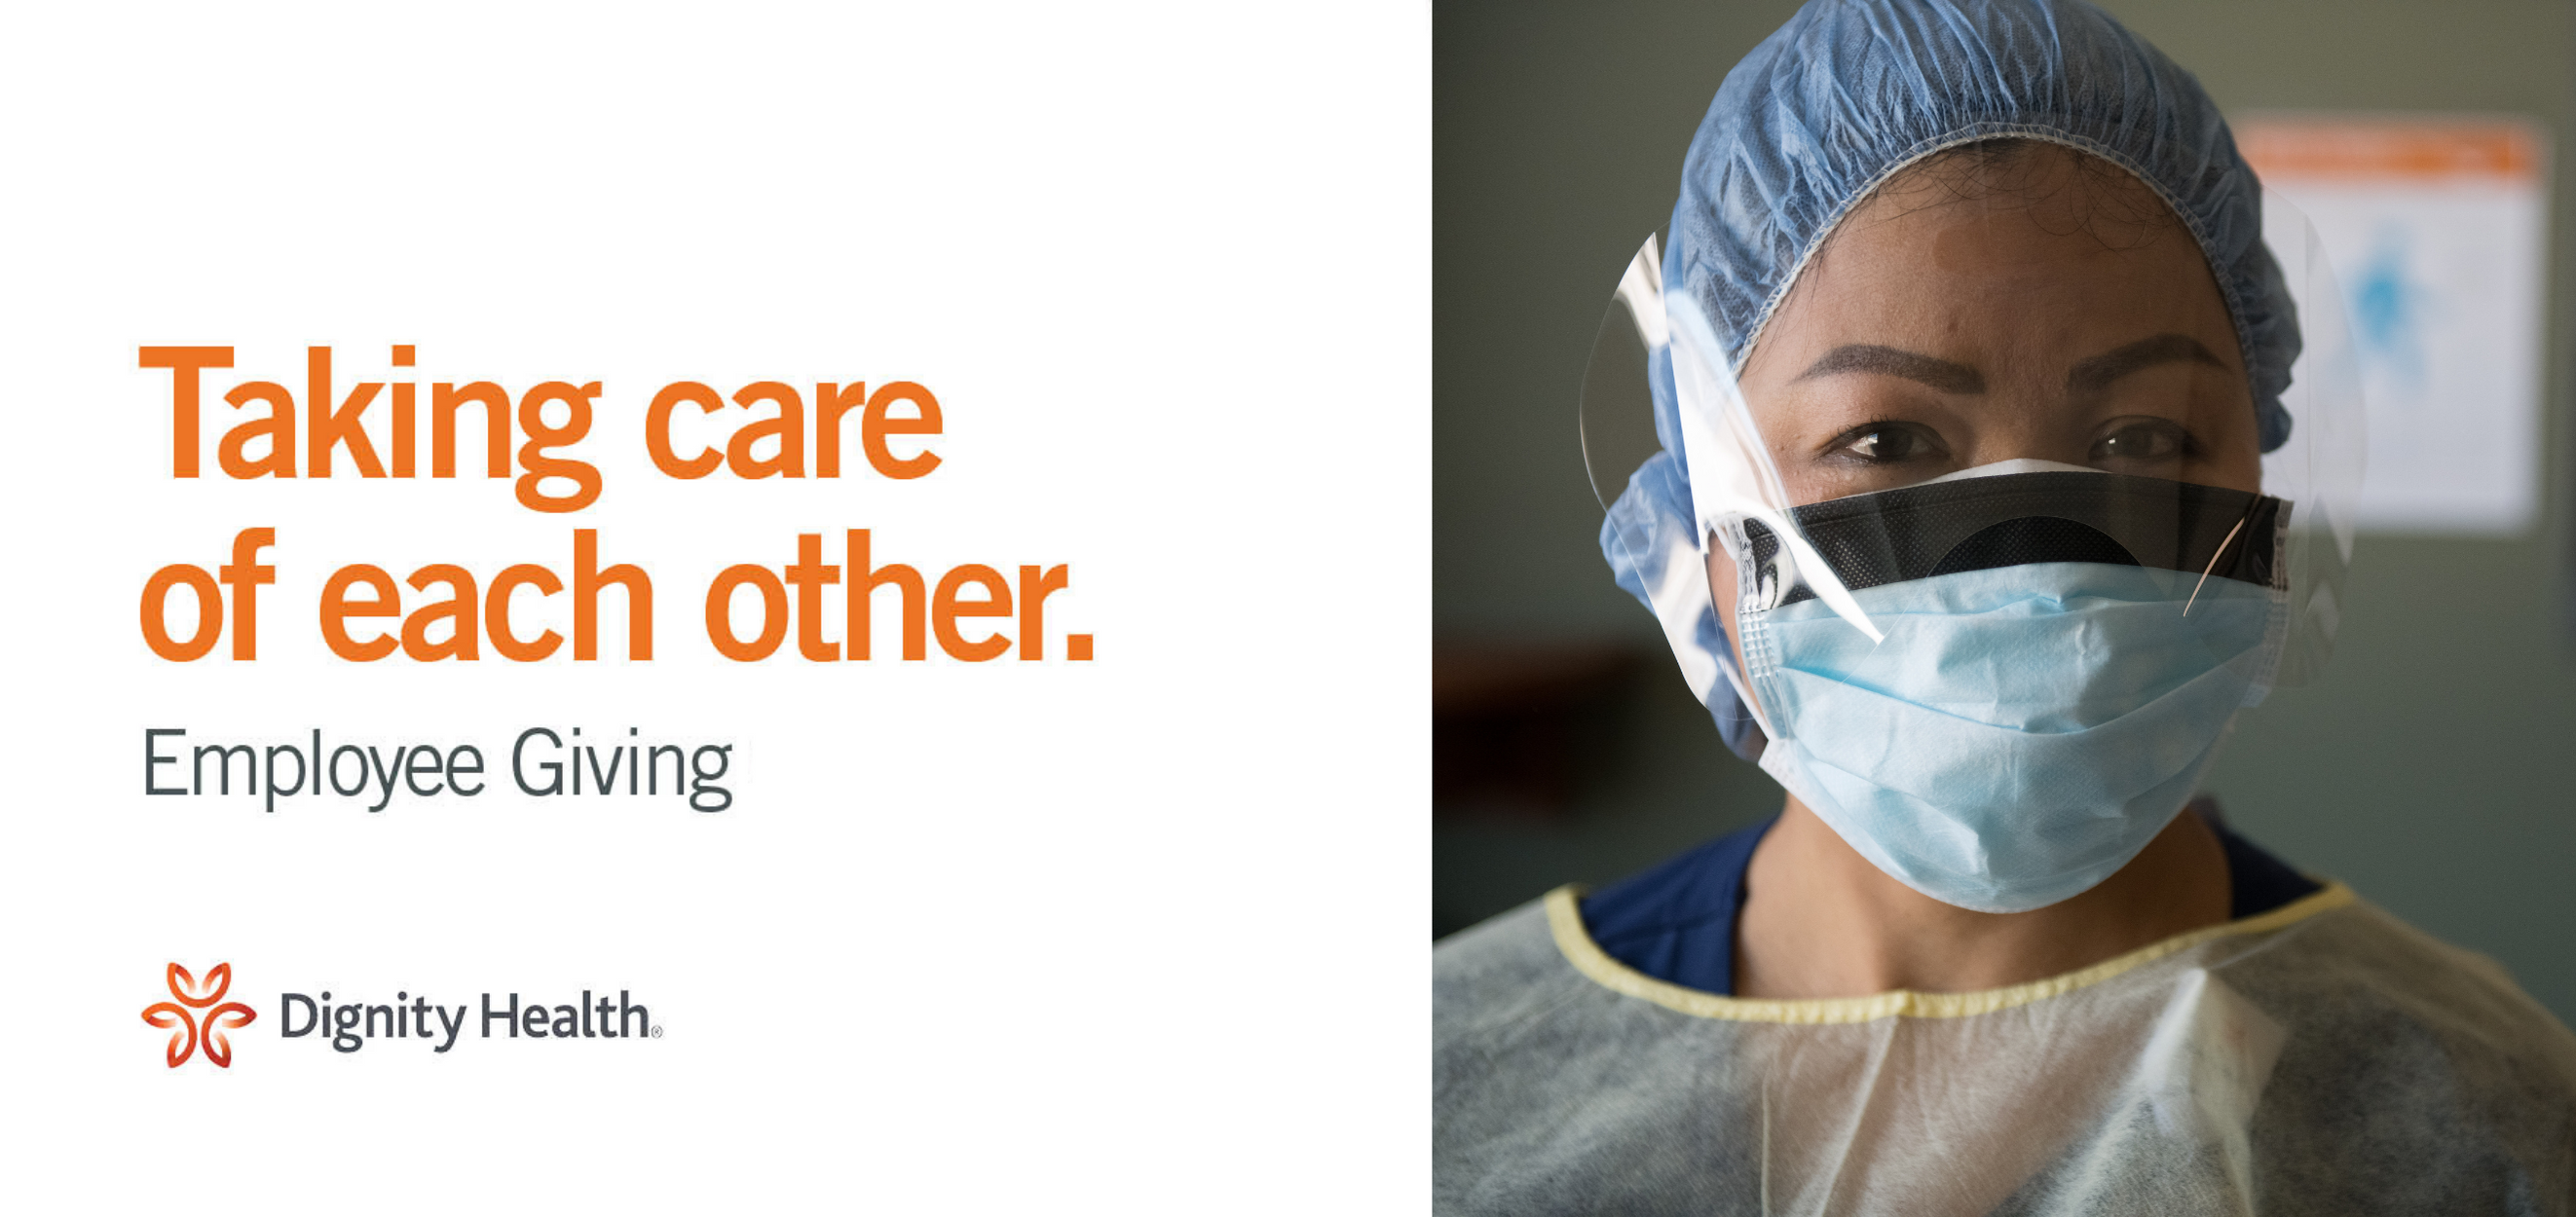 Portrait of Marian caregiver in mask, face shield and scrubs. Copy reads "Taking care of each other. Employee Giving."